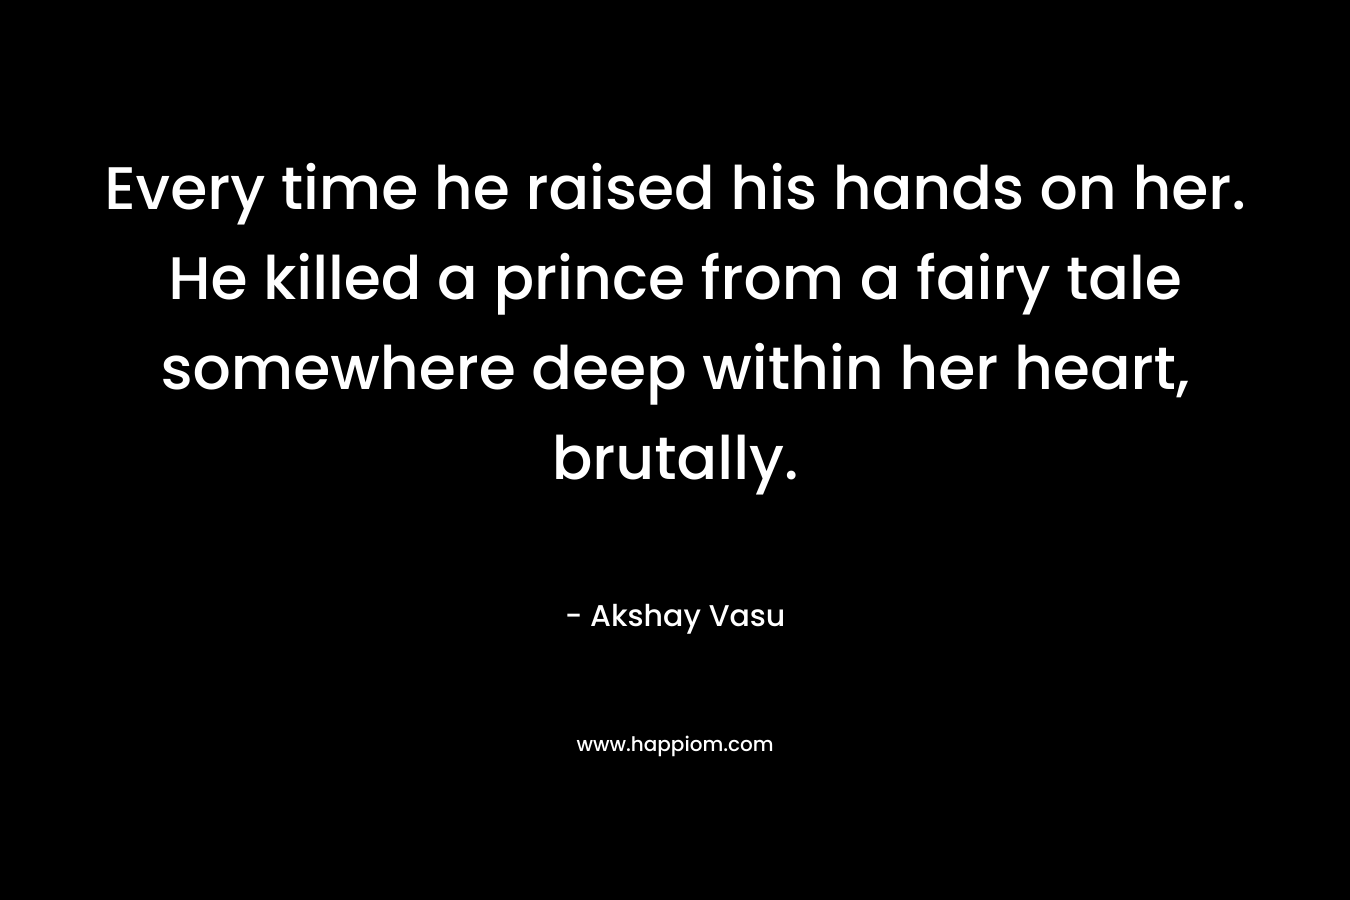 Every time he raised his hands on her. He killed a prince from a fairy tale somewhere deep within her heart, brutally.